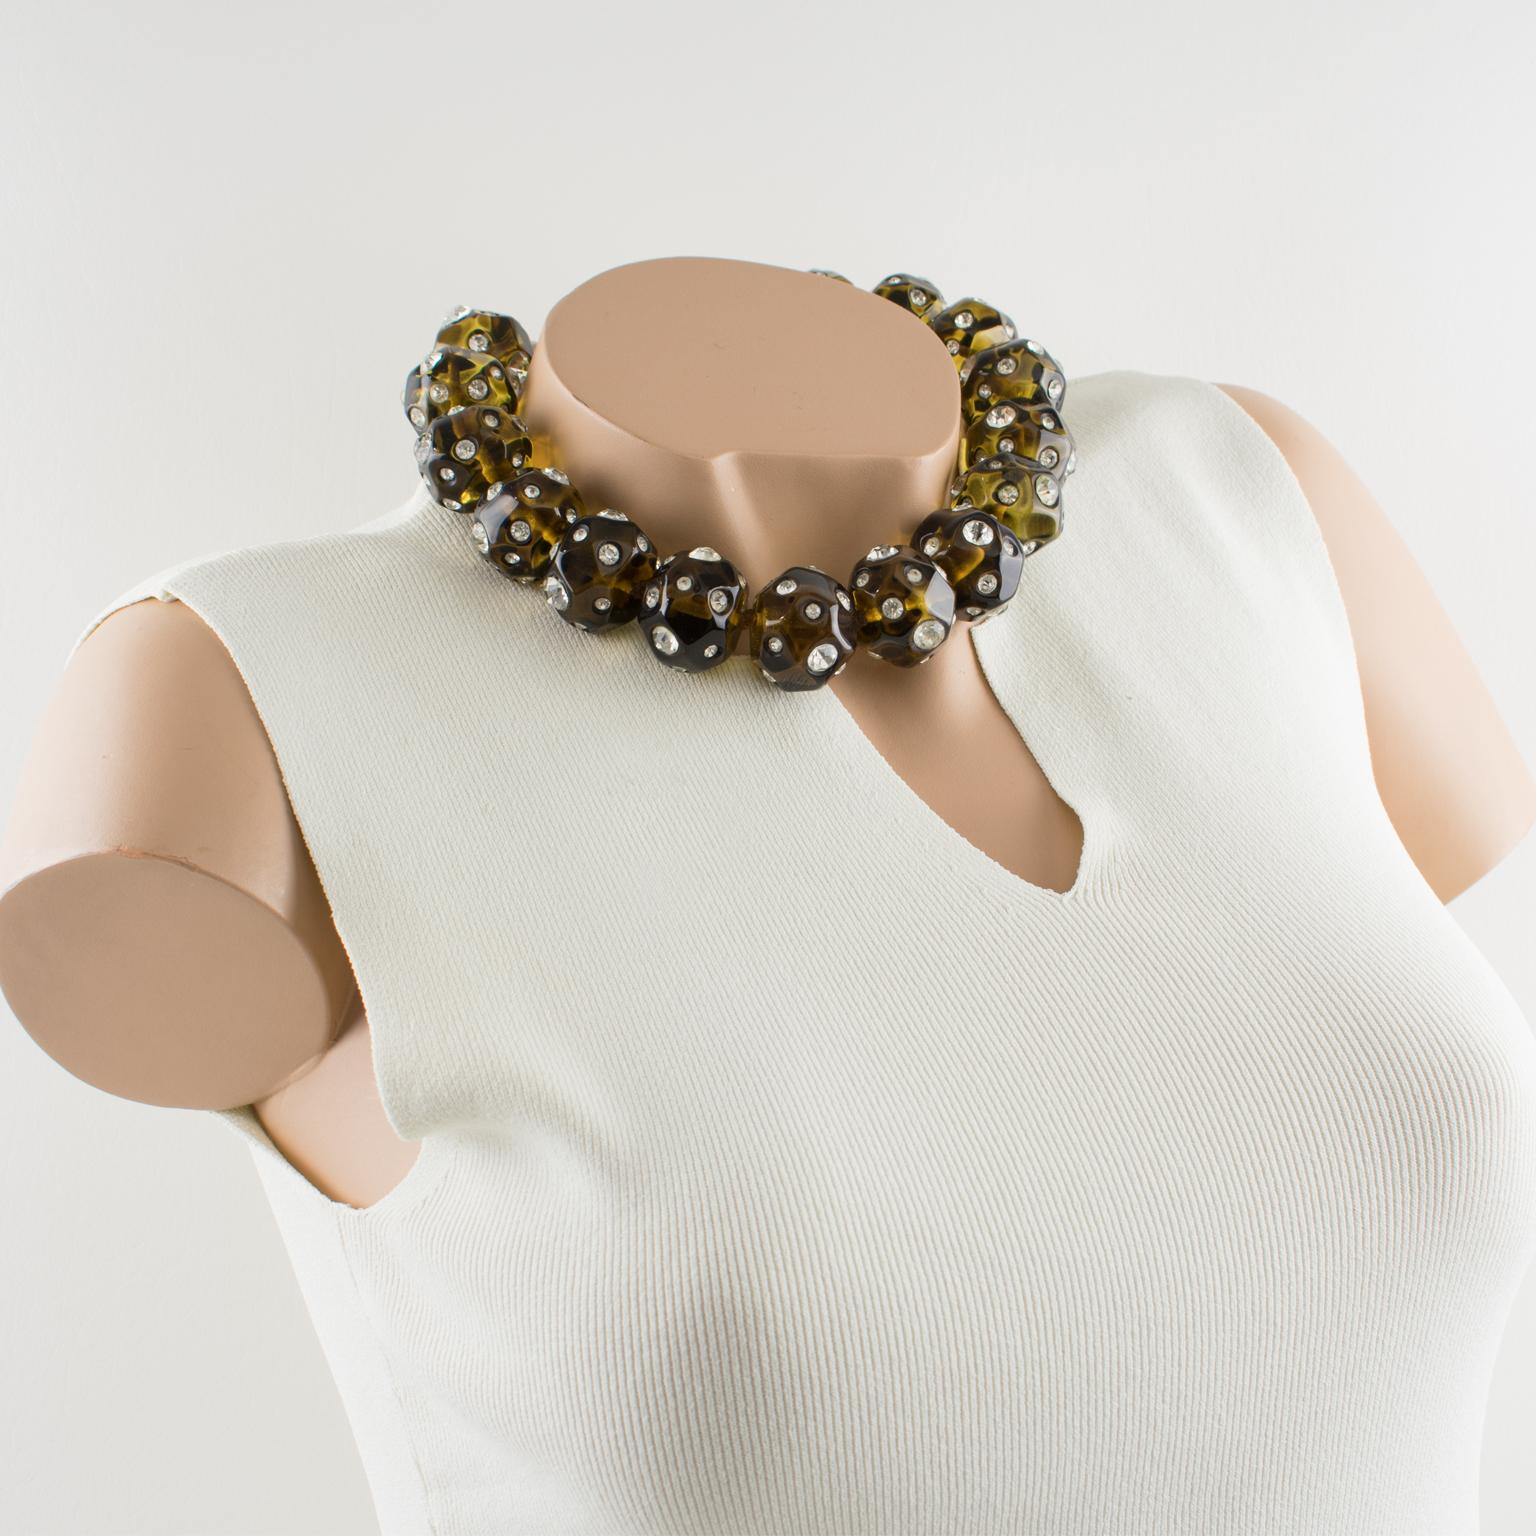 Striking and rare Angela Caputi, made in Italy choker necklace. Around-the-neck shape builds with large asymmetric resin beads in transparent olive green color all ornate with crystal clear rhinestones. Her matching of colors is always bold and